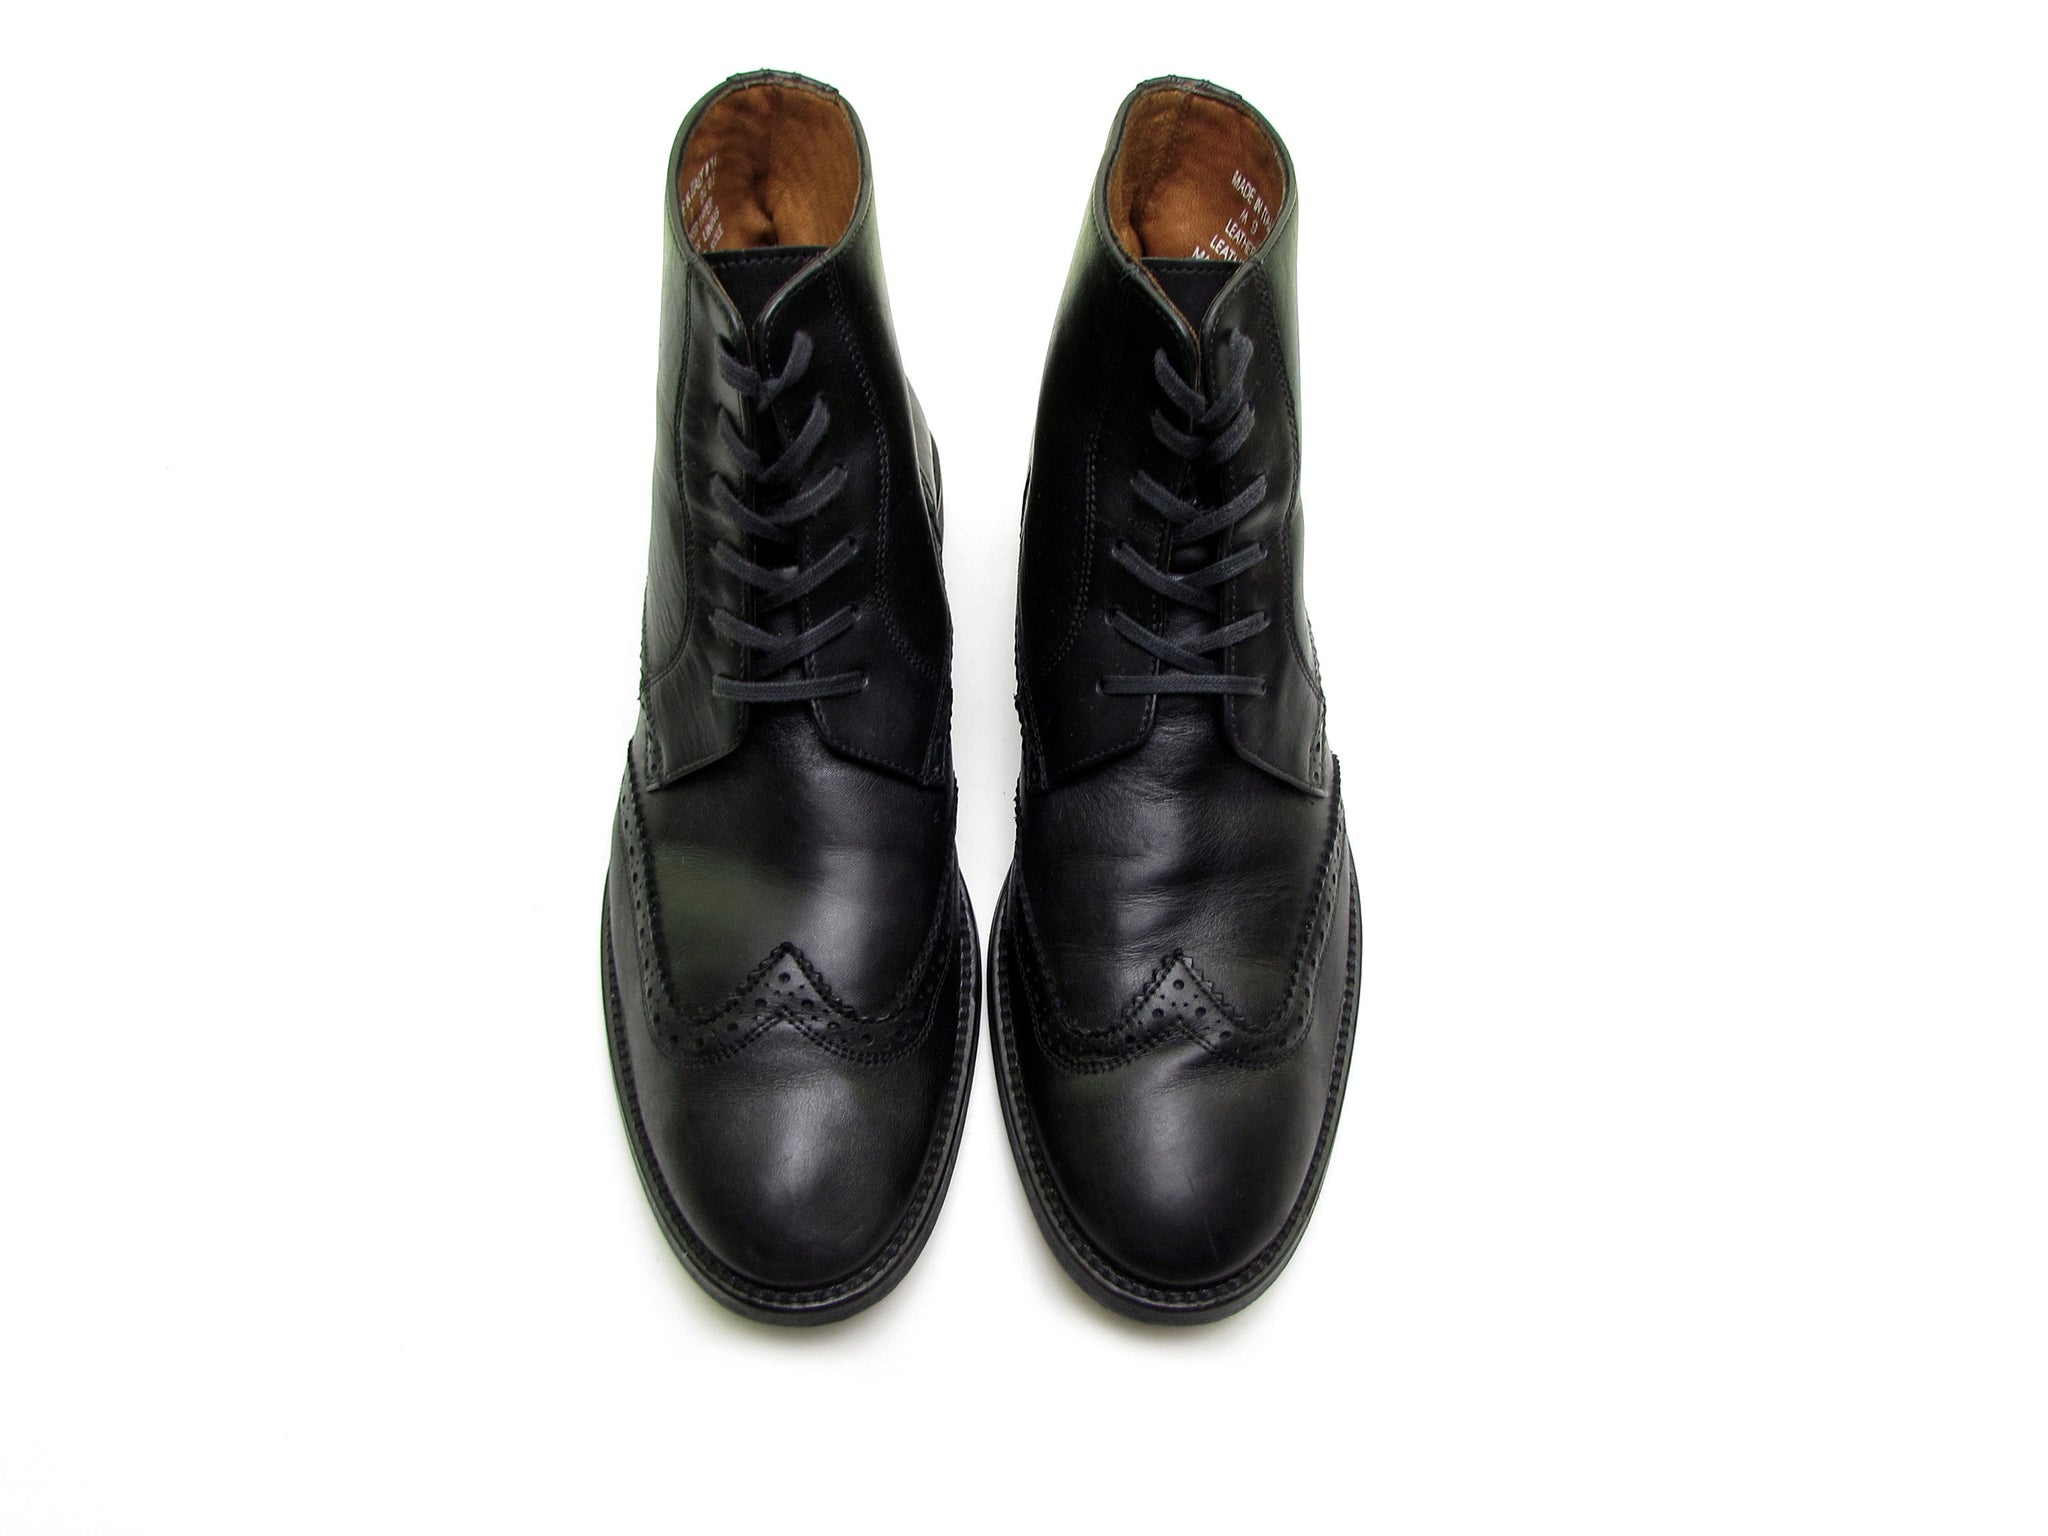 billedtekst Sequel Middelhavet Vintage Italian leather boots brogue boots oxford boots lace up boots black chelsea  boots beatle boots 90s vintage ankle boots mens, Made in Italy. Size 9 –  vintage90s.com